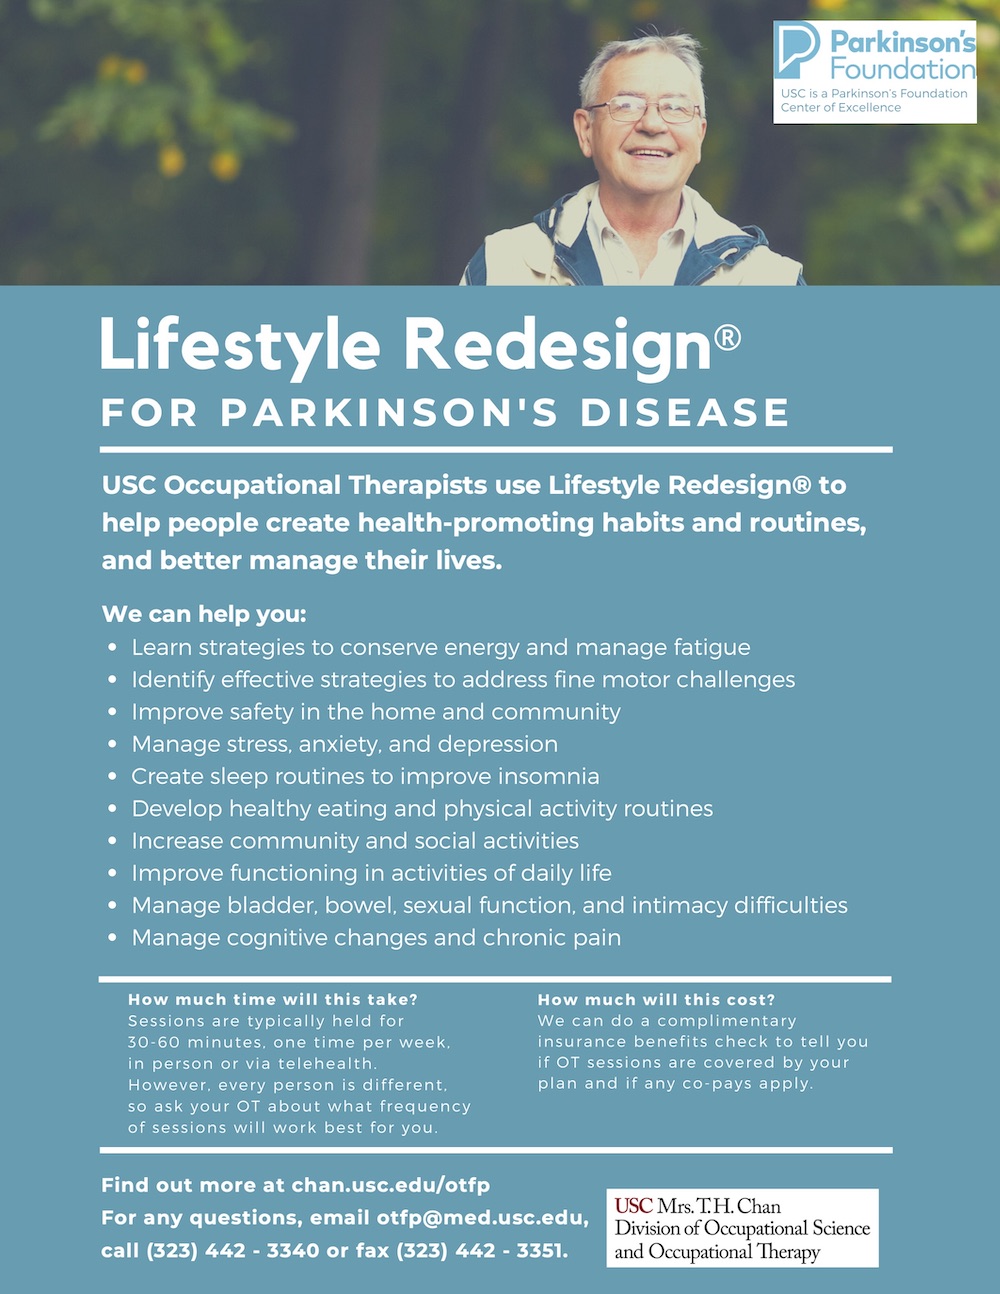 Lifestyle Redesign for Parkinson's Disease